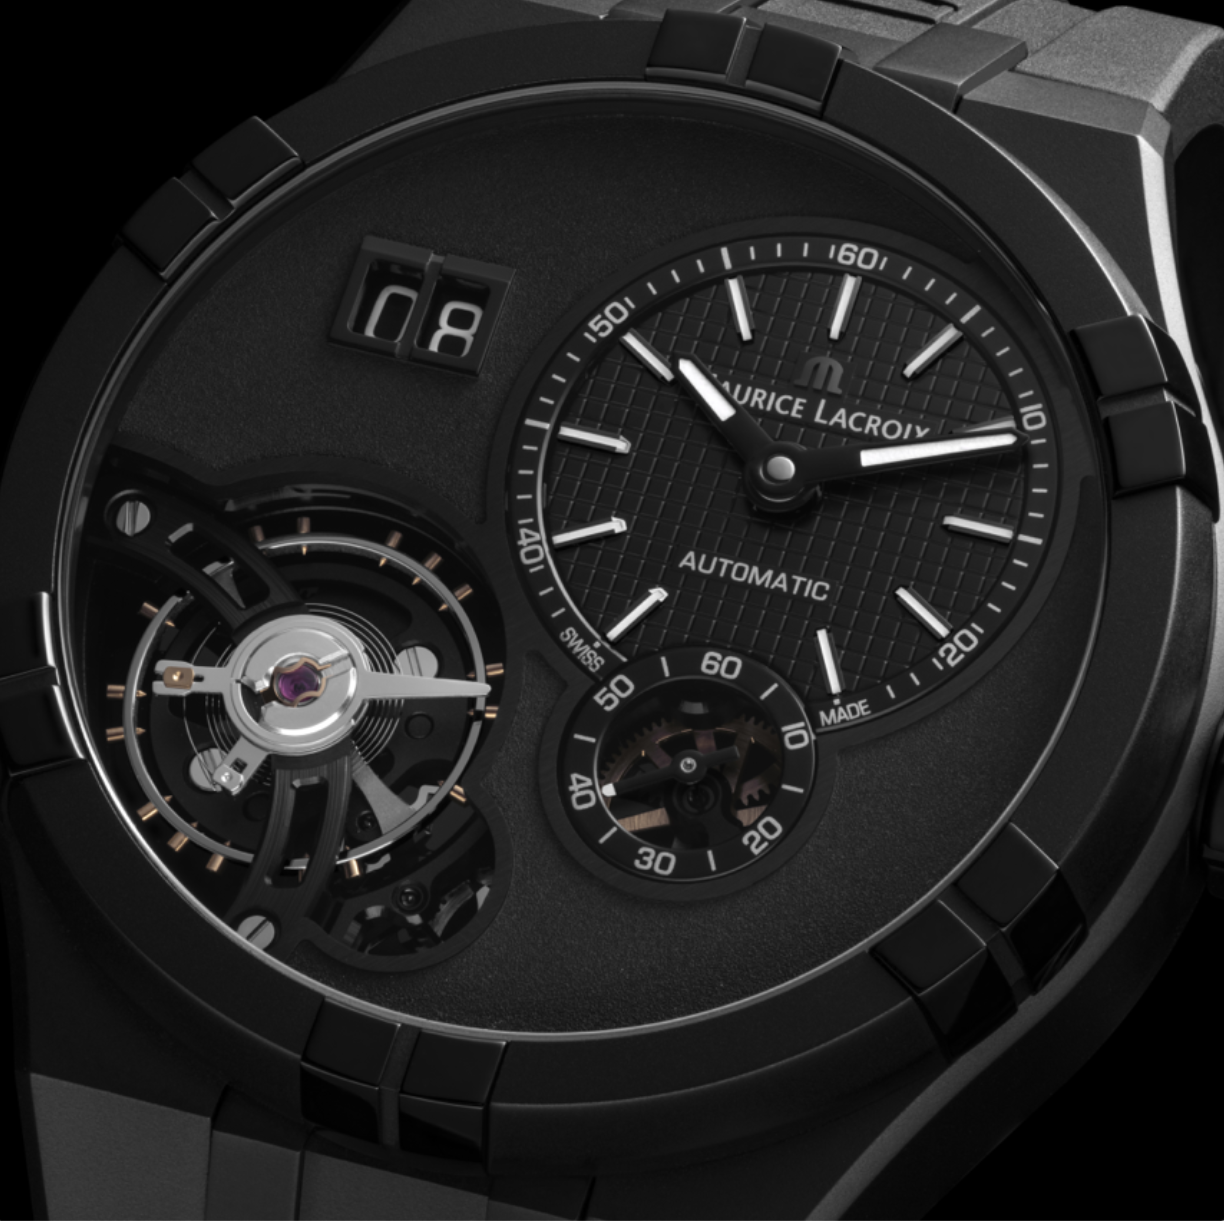 Introducing the Maurice Lacroix Aikon Master Grand Date Black